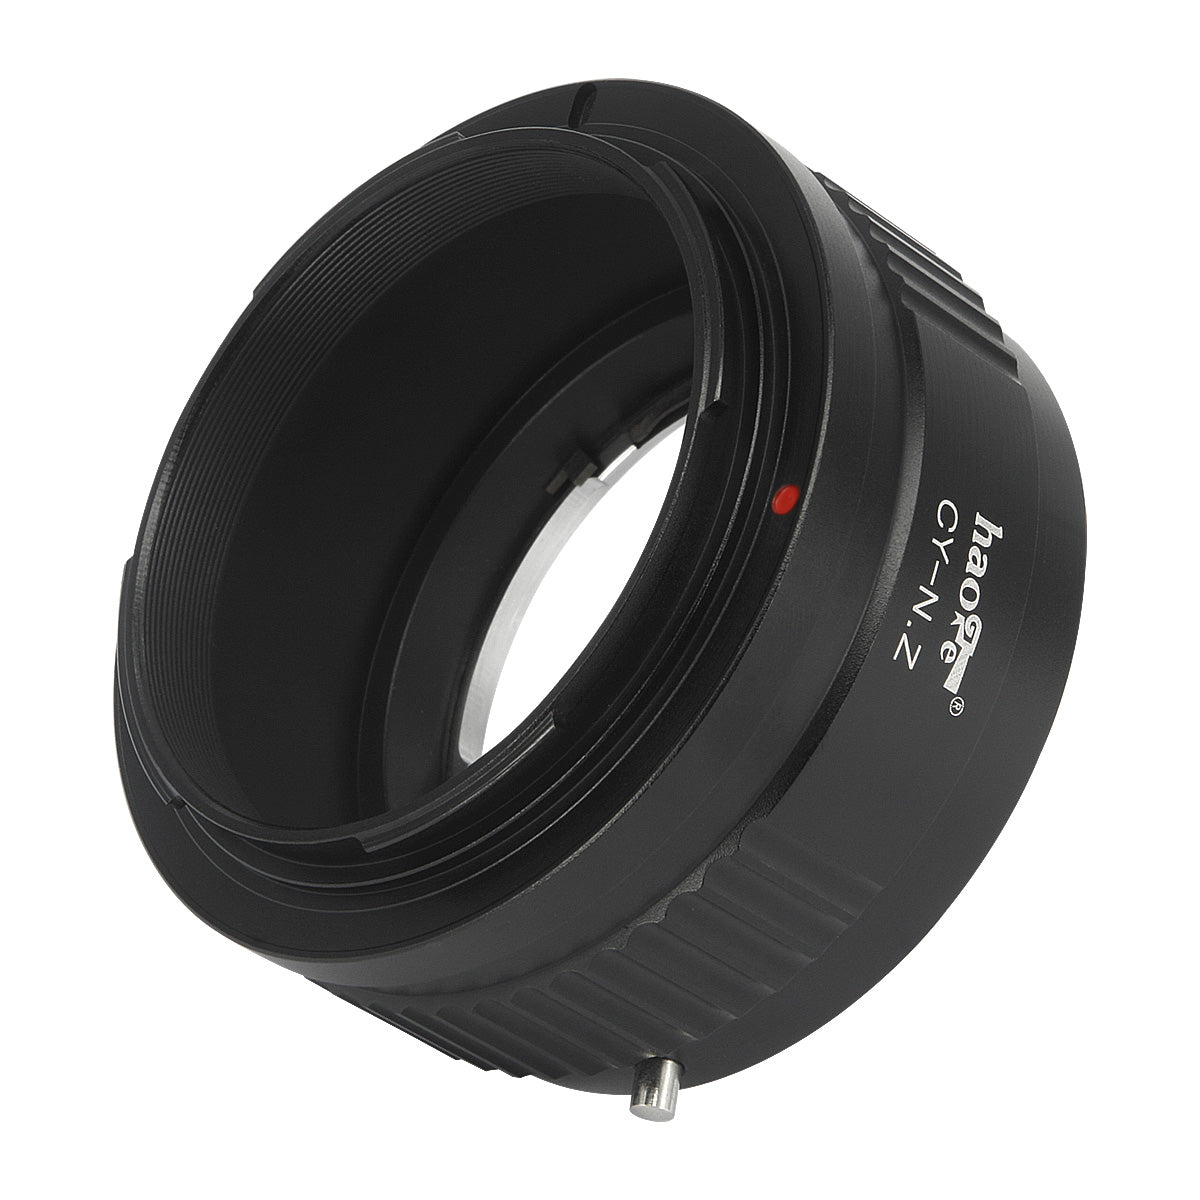 Haoge Manual Lens Mount Adapter for Contax / Yashica C/Y CY mount Lens to Nikon Z Mount Camera Such as Z6 Z7